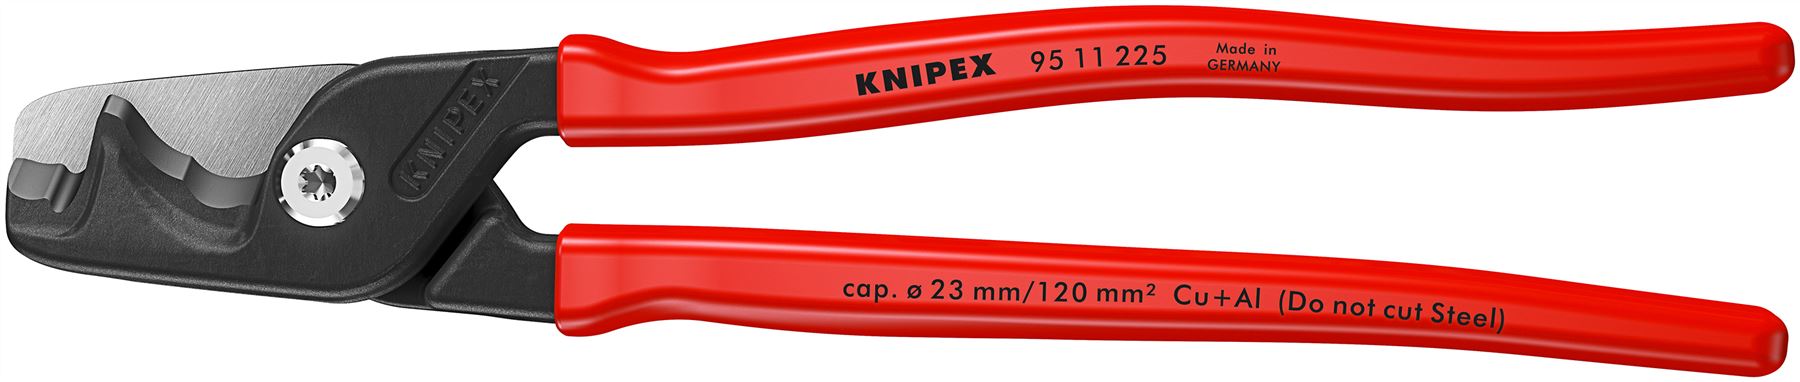 KNIPEX StepCut XL Cable Shears Cutting Pliers 225mm Plastic Coated Handles 95 11 225